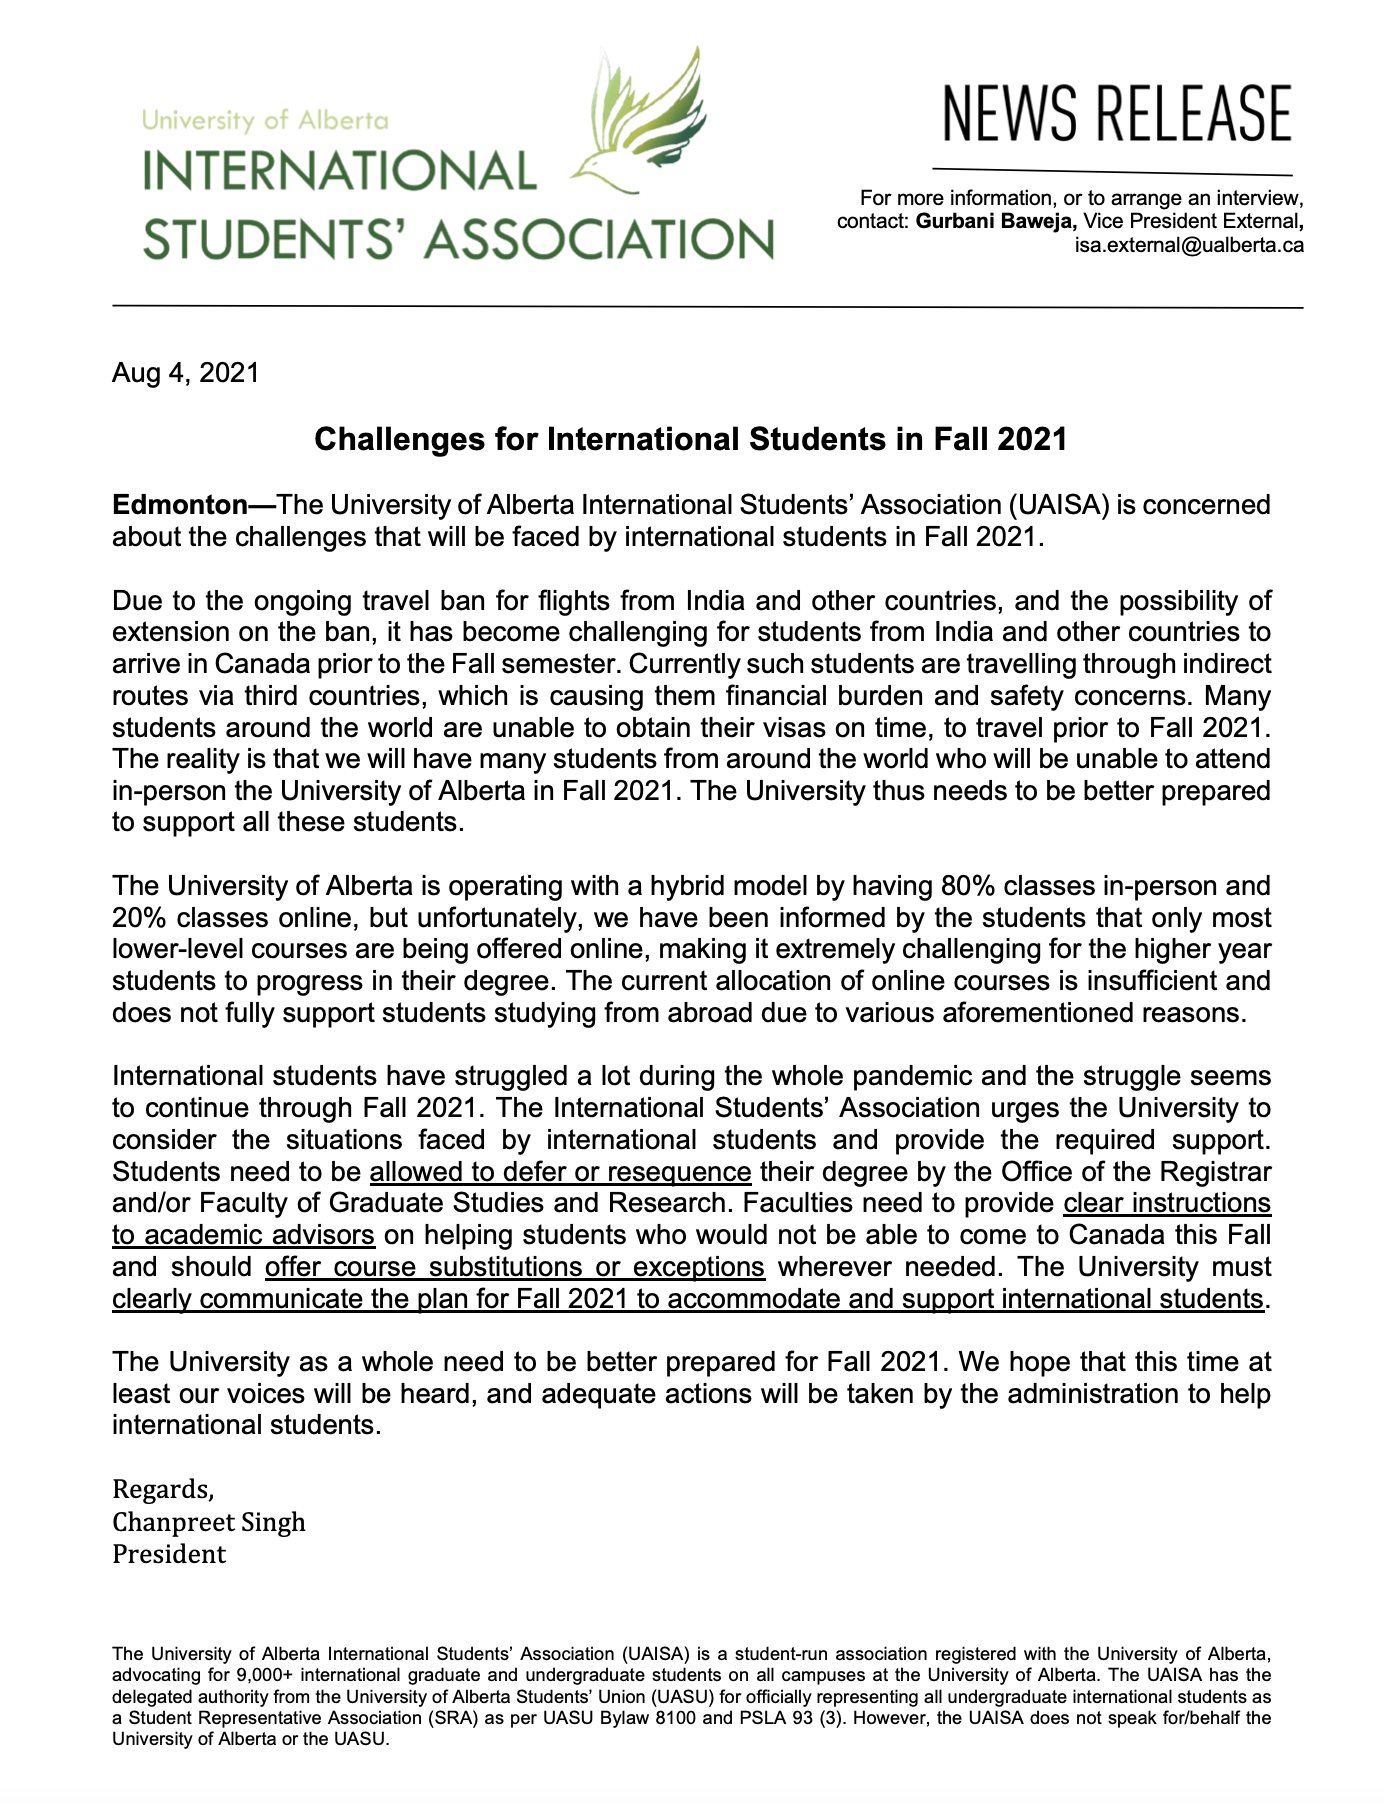 Challenges for International Students in Fall 2021